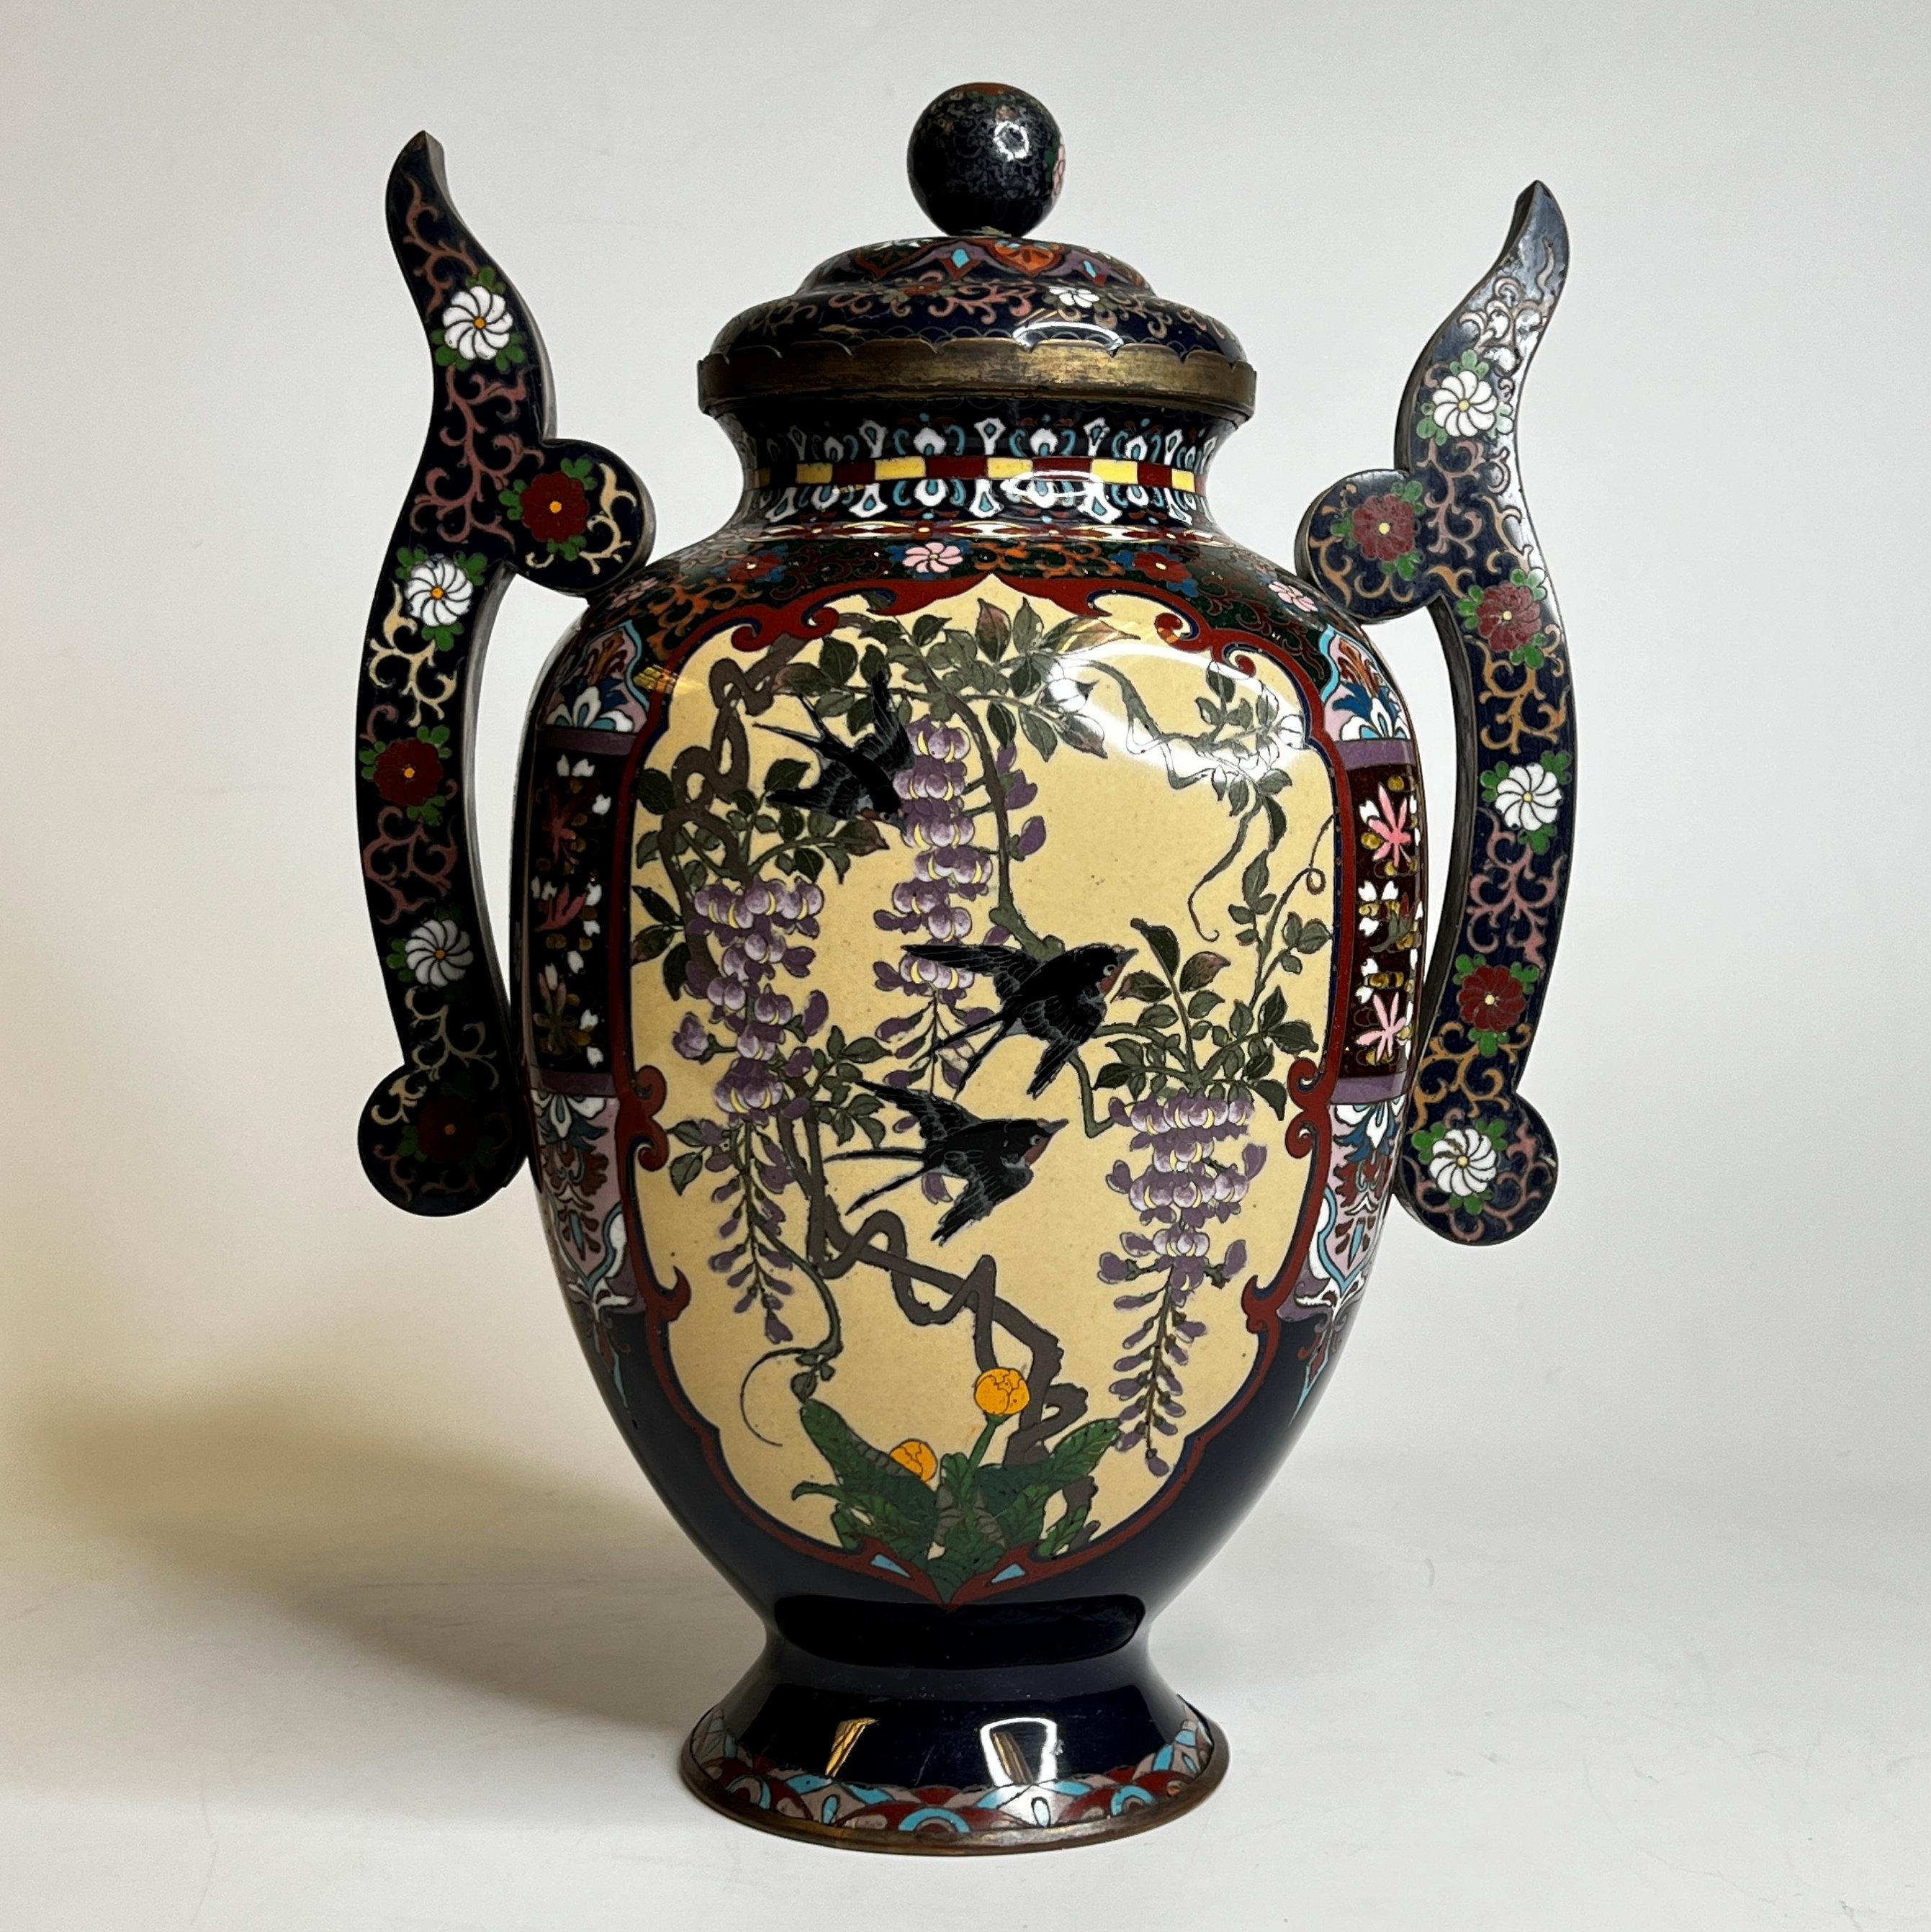 Very fine quality Japanese Meiji period Cloisonne Enamel covered vase with birds and wisteria motif.